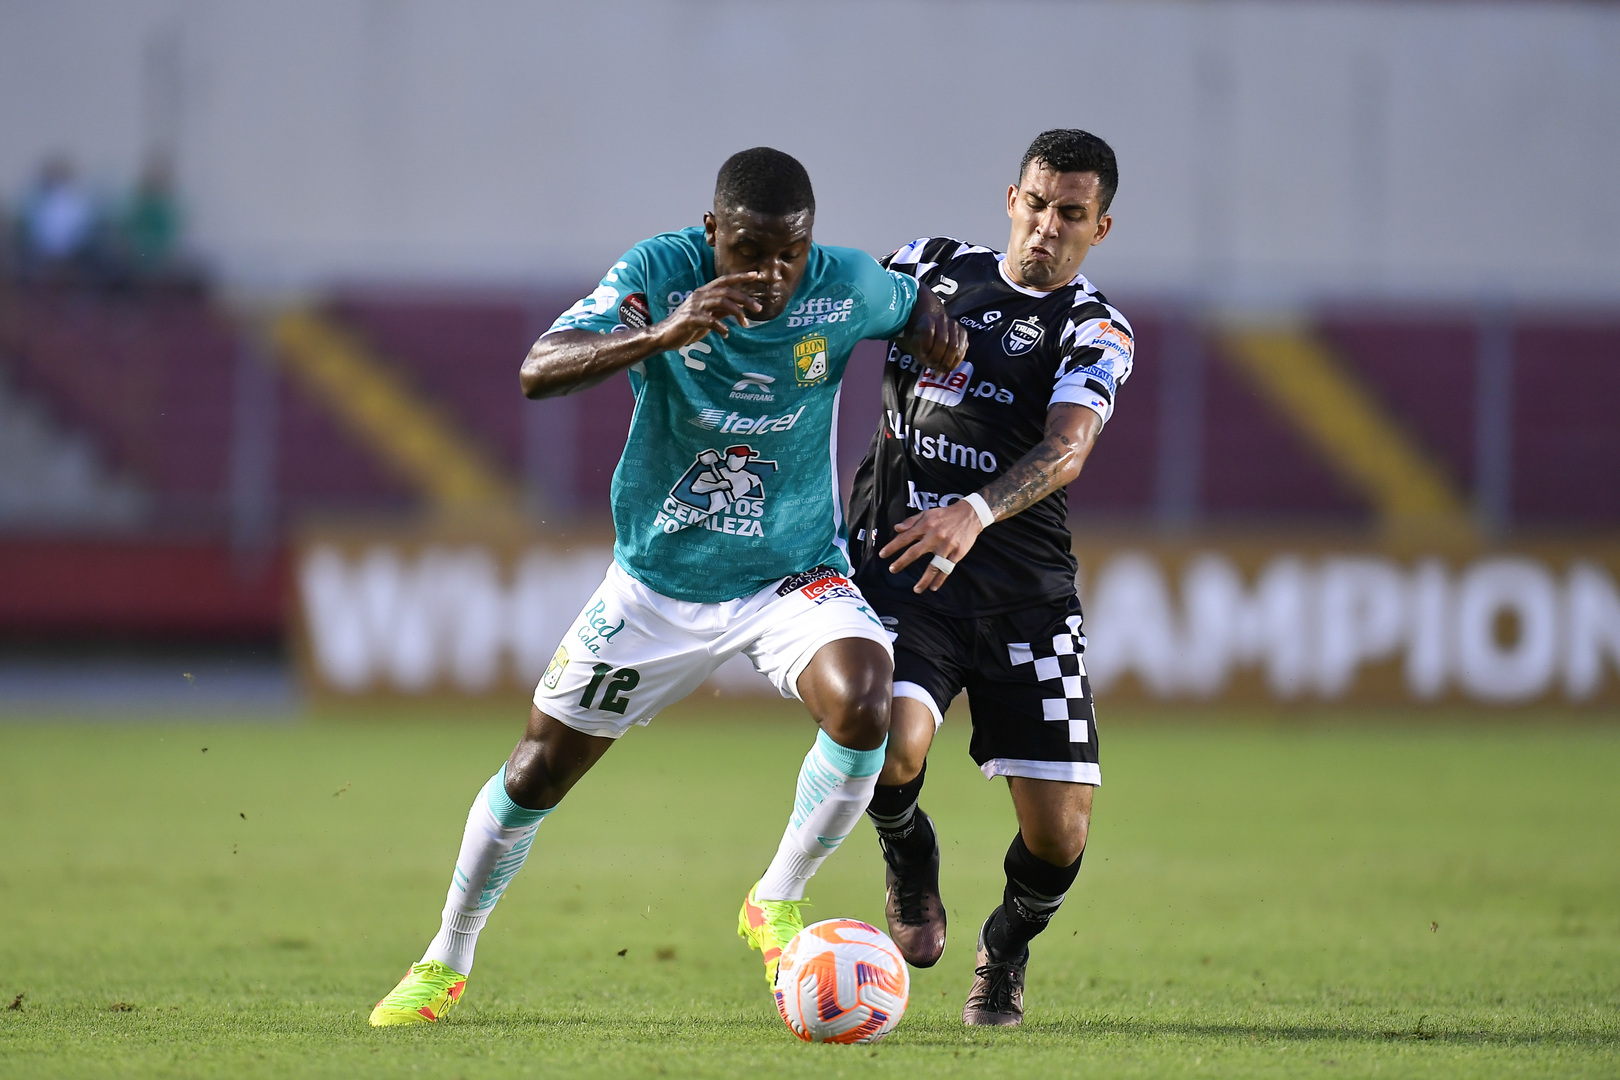 Club Leon take on Tauro with sights set on quarterfinals